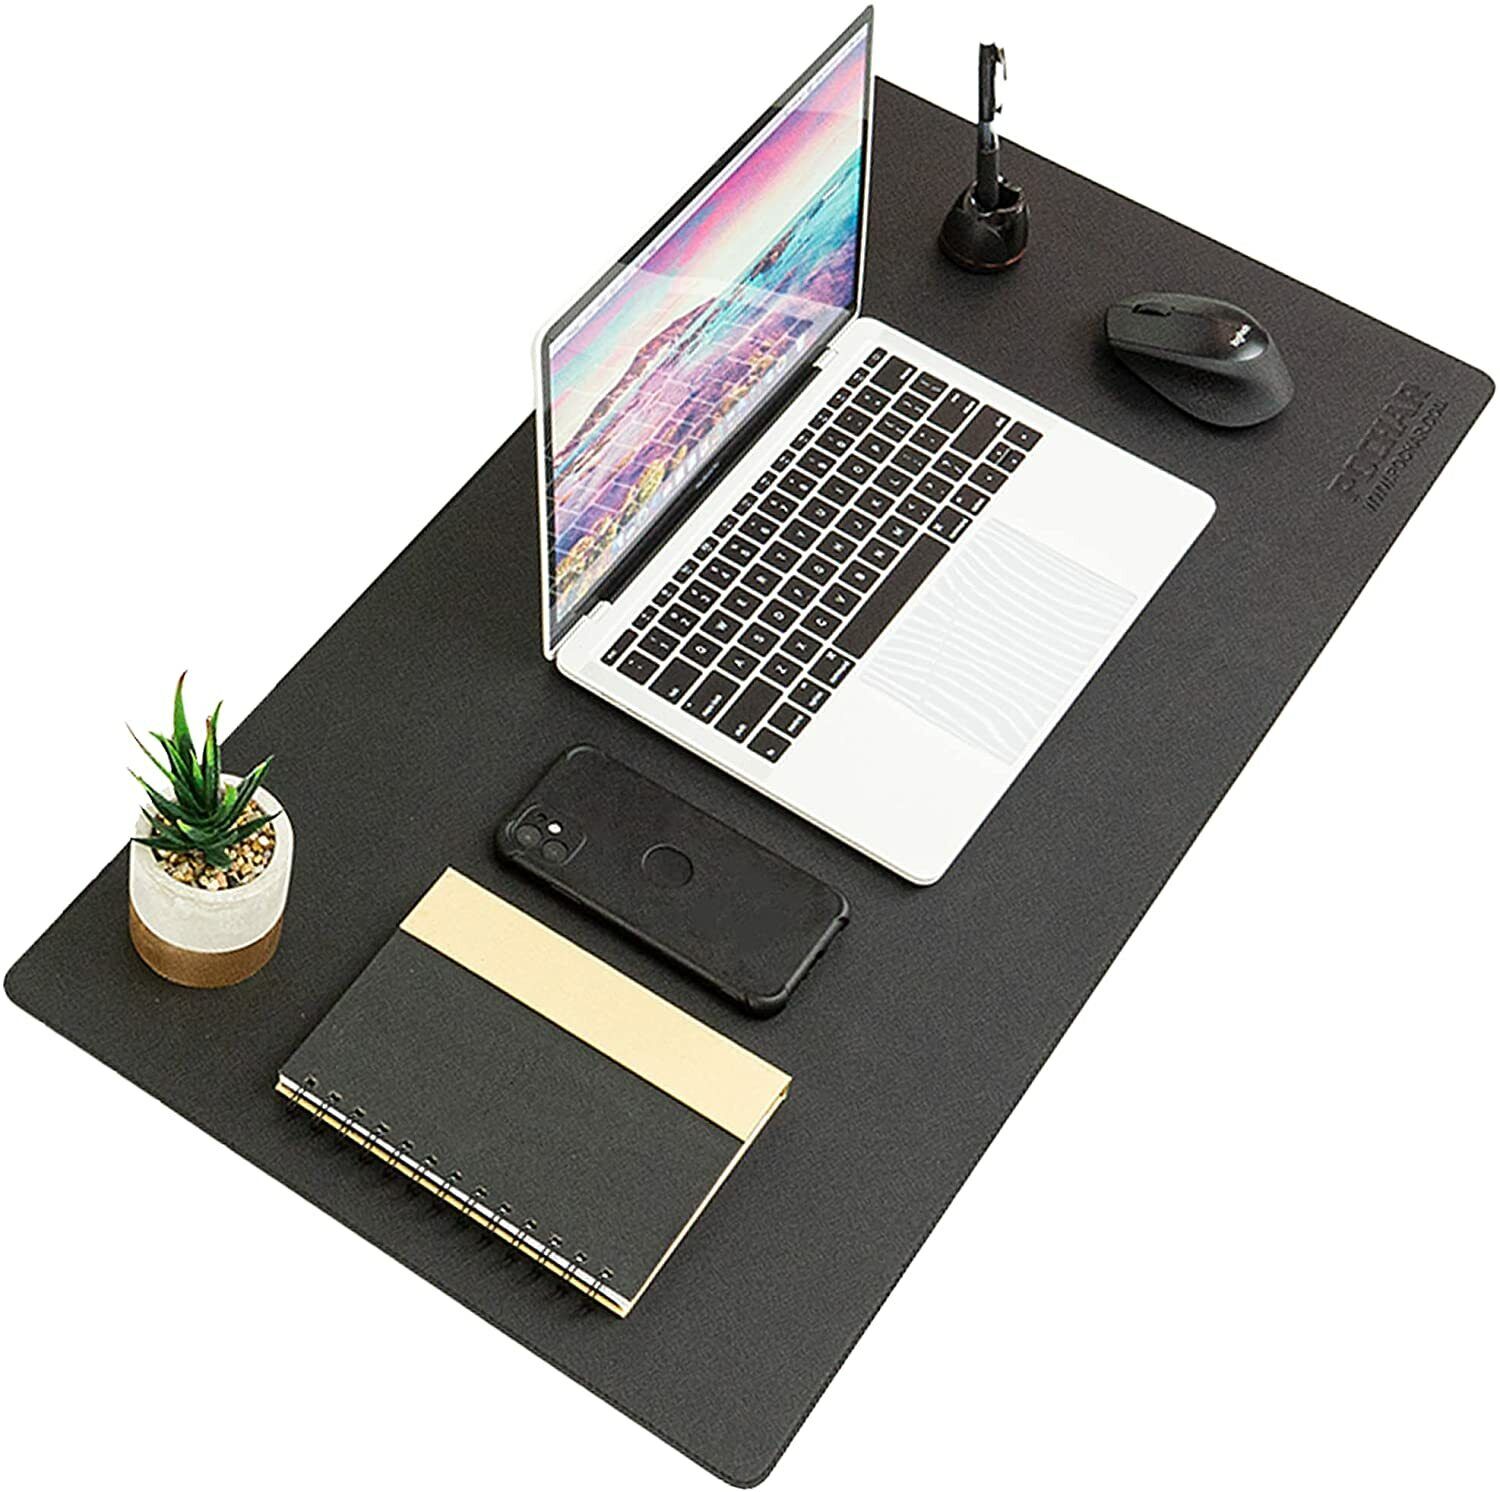 31.25'' x 15.6'' PU Leather Desk Pad - Extra Large Portable Mouse Pad (Black)